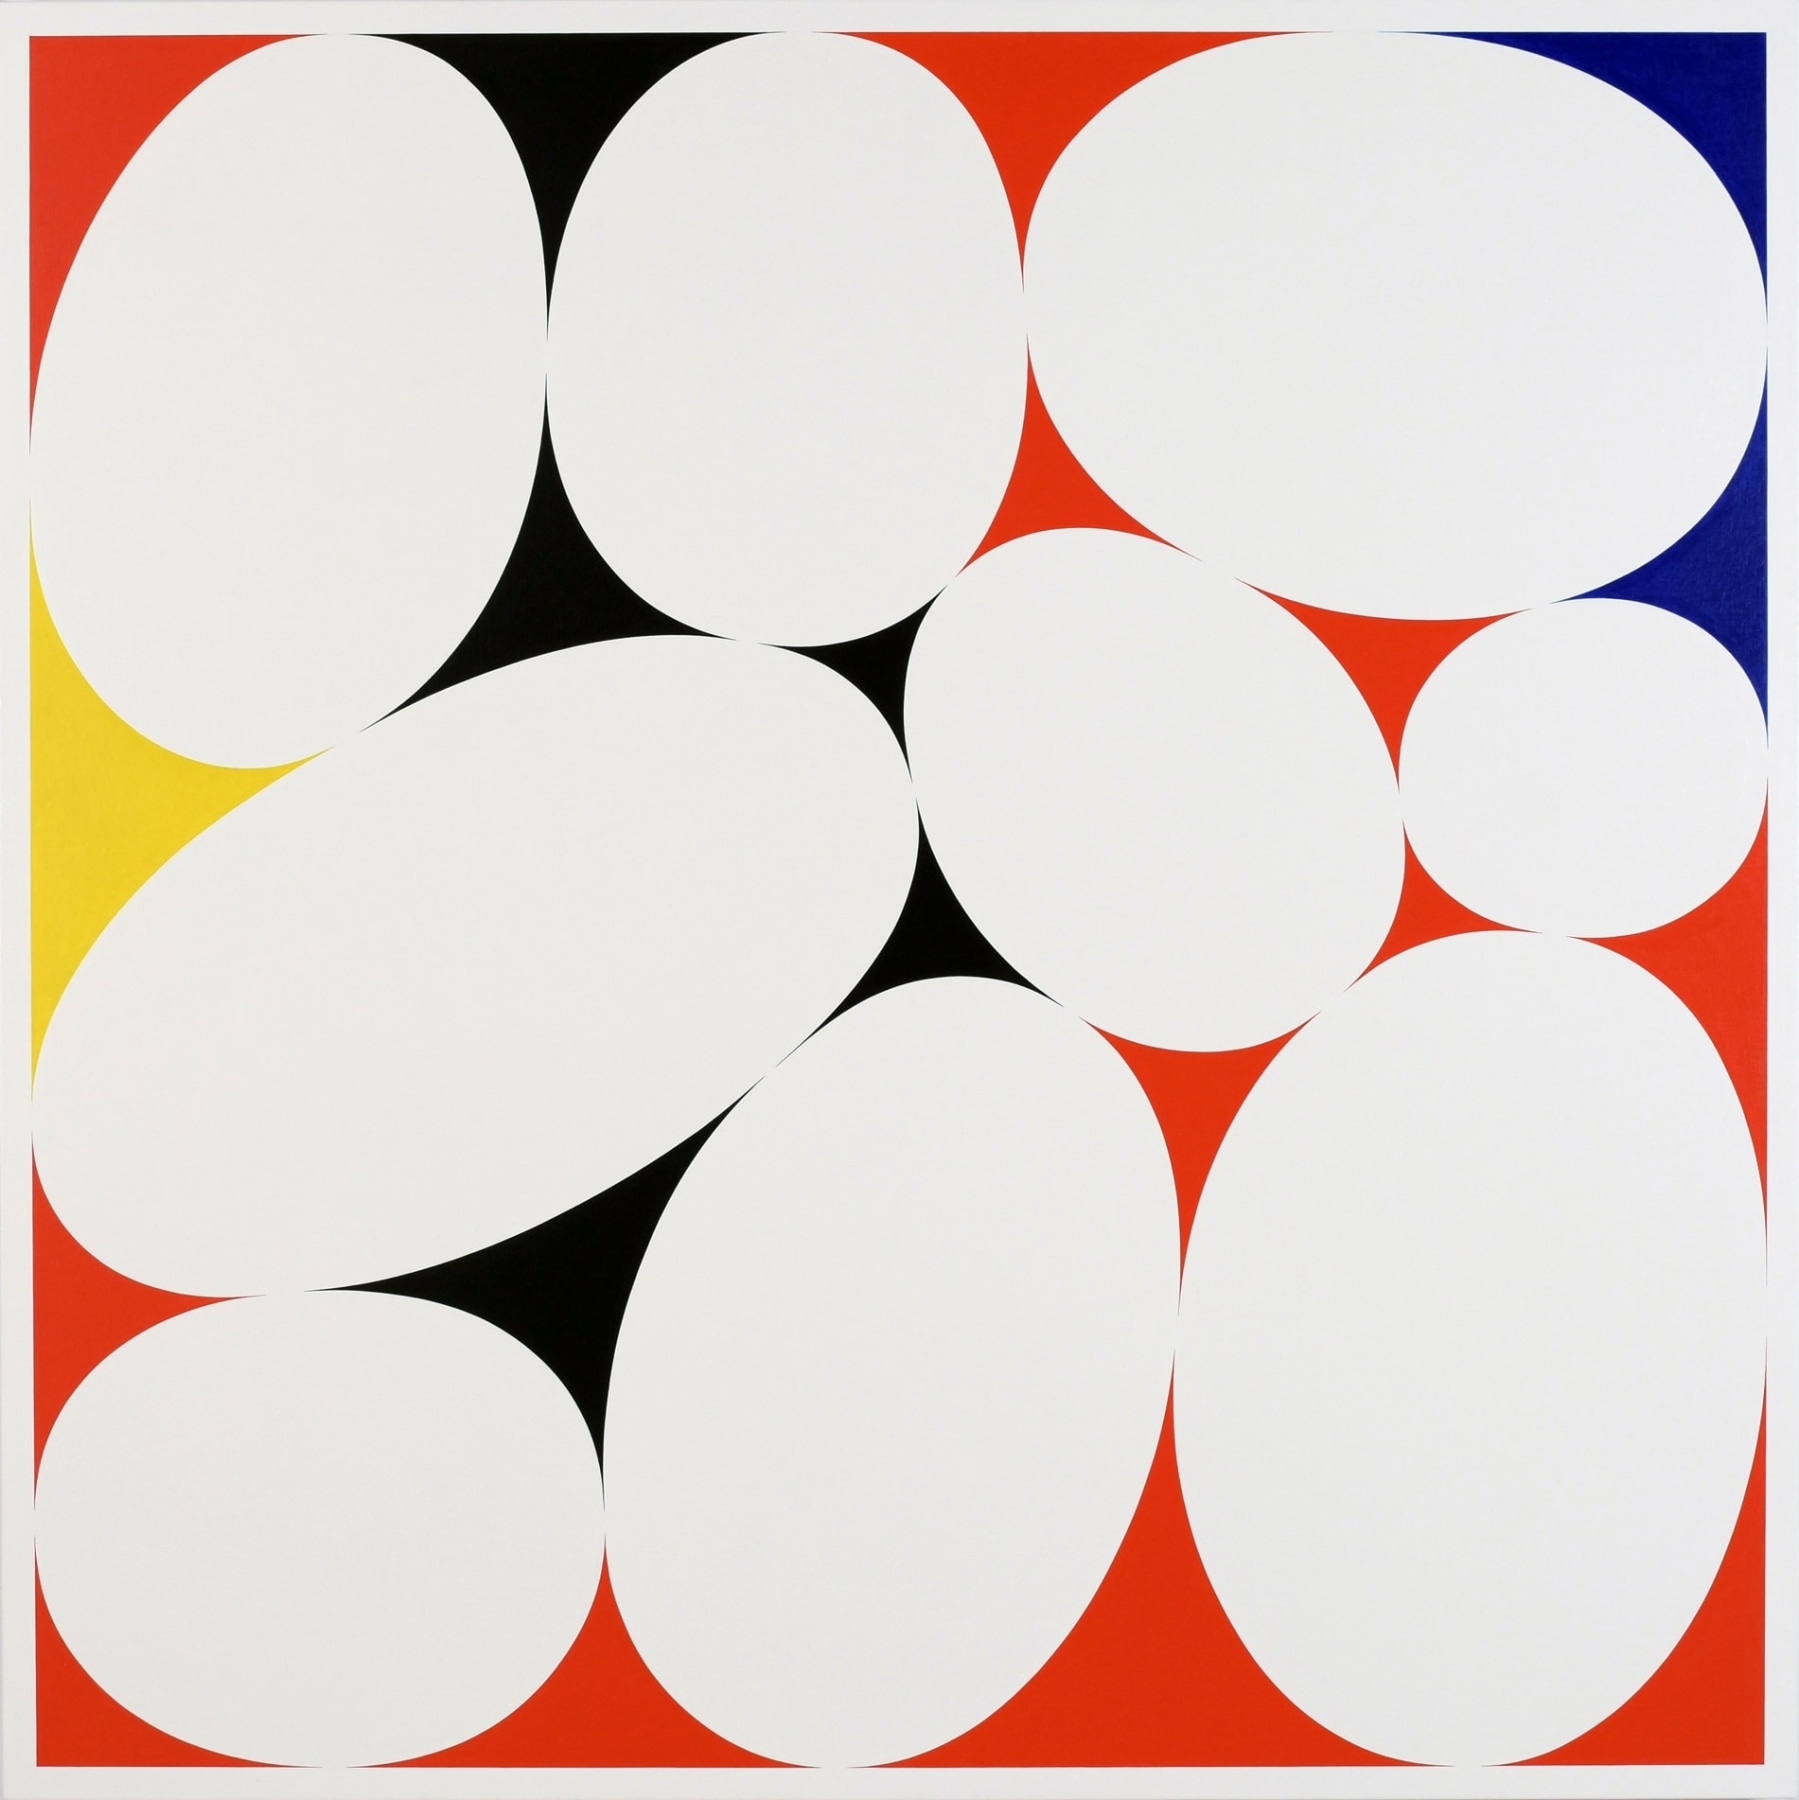 Cary Smith Ovals #31 (red-black-blue-yellow), 2015